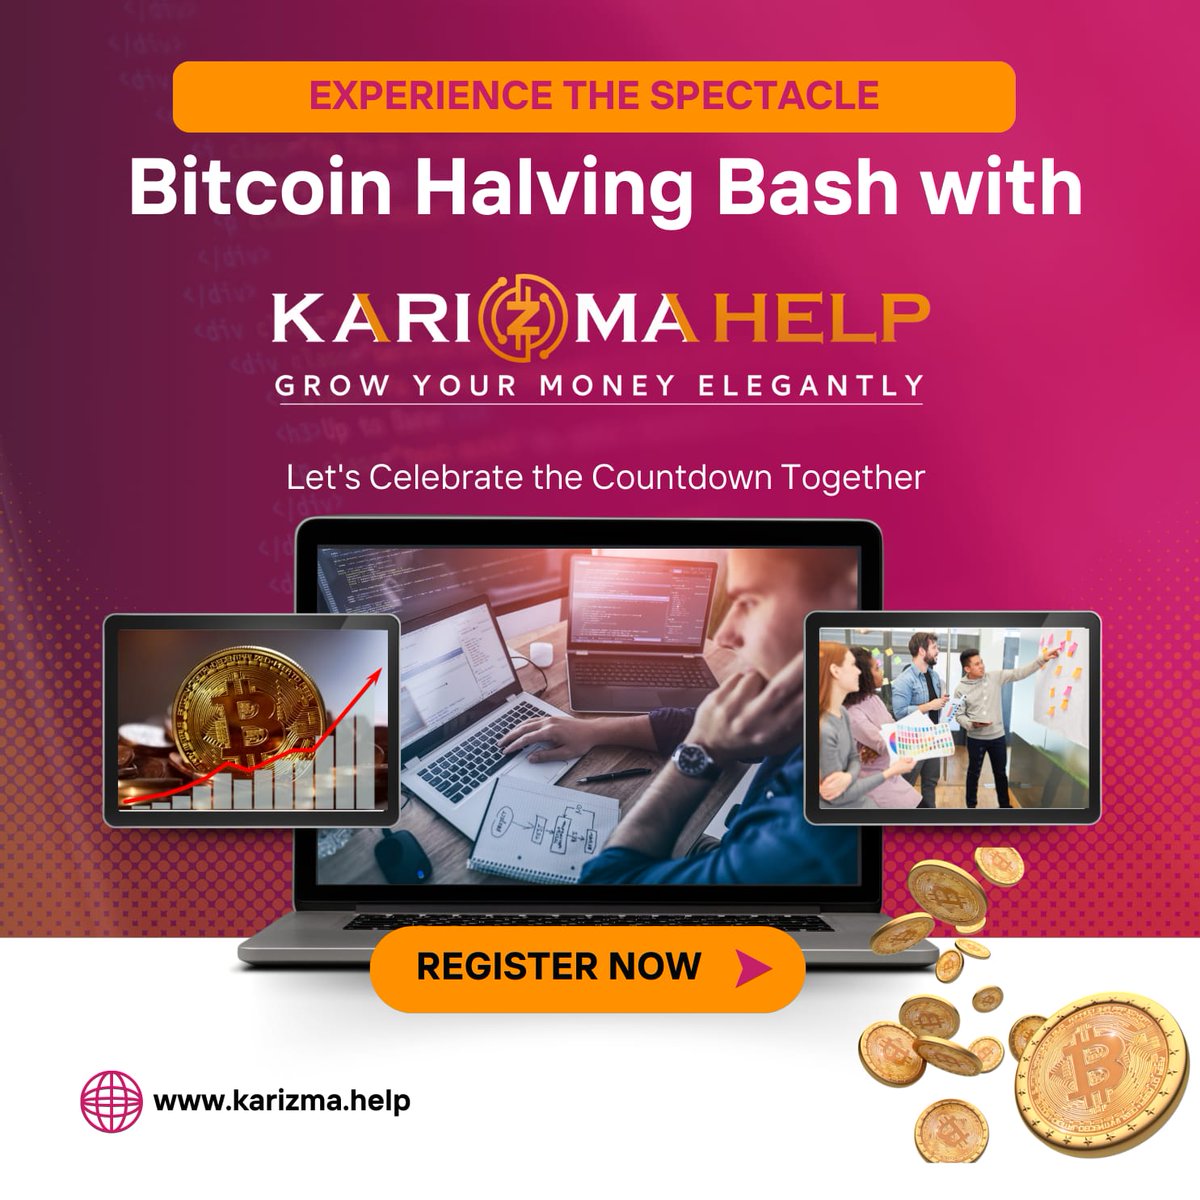 Experience the Spectacle
Bitcoin Halving Bash with Karizma Help
Let's Celebrate the Countdown Together
Register Now
karizma.help

#BitcoinHalving #KarizmaHelp #CountdownCelebration #earning #bitcoin #peertopeer